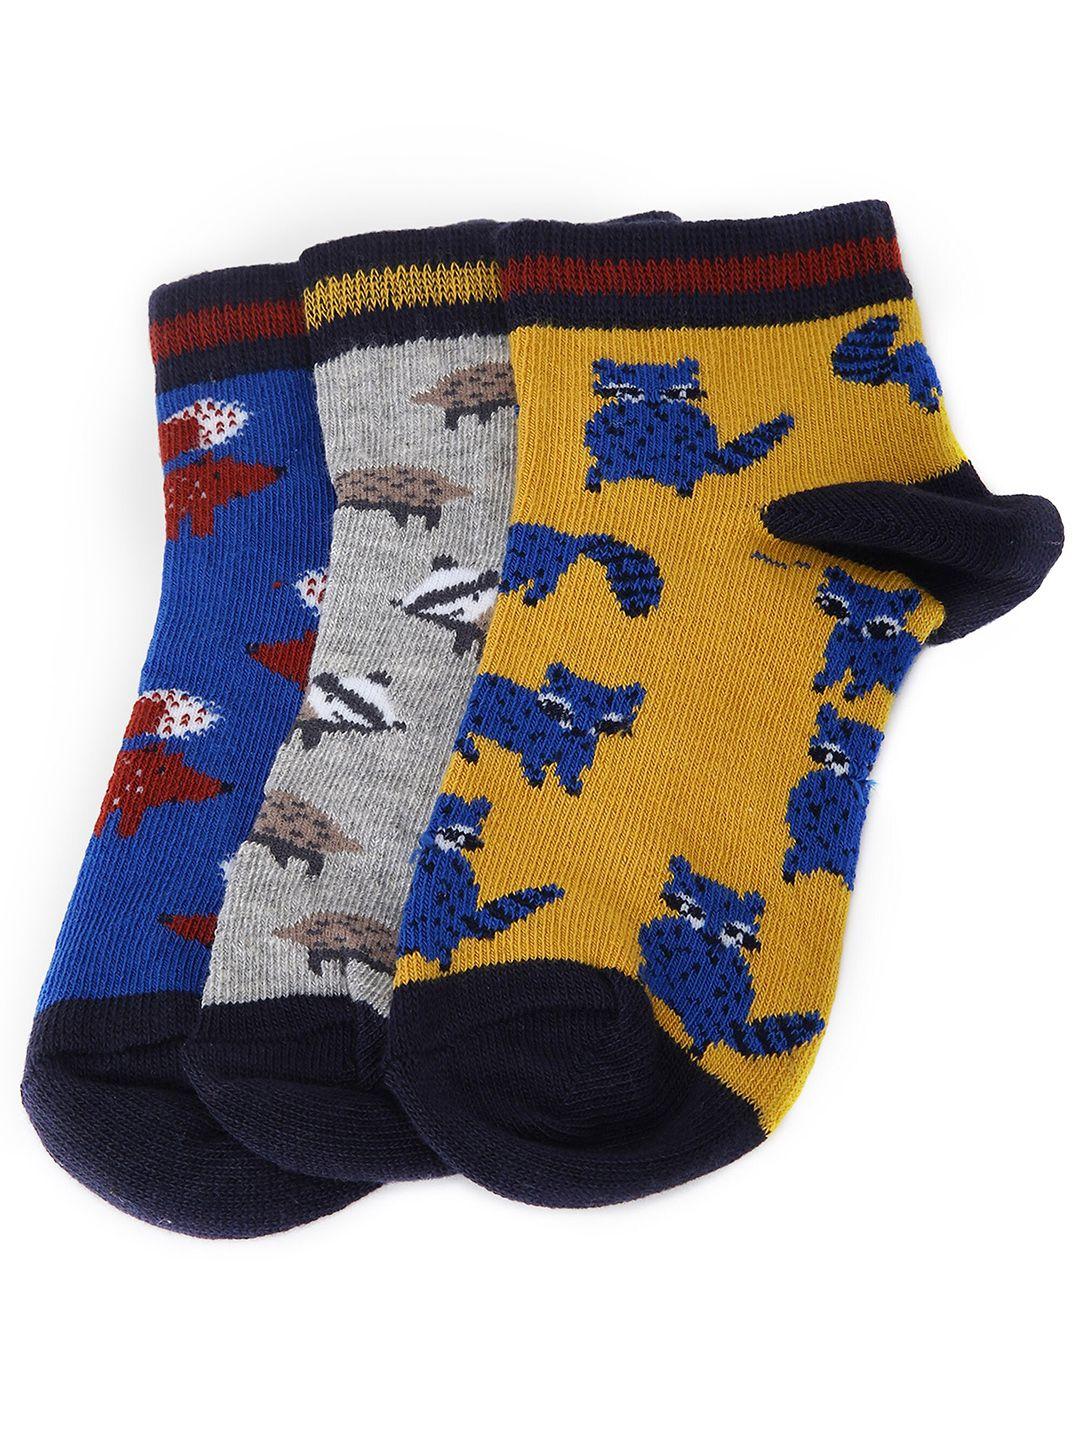 max boys pack of 3 ankle length cotton socks